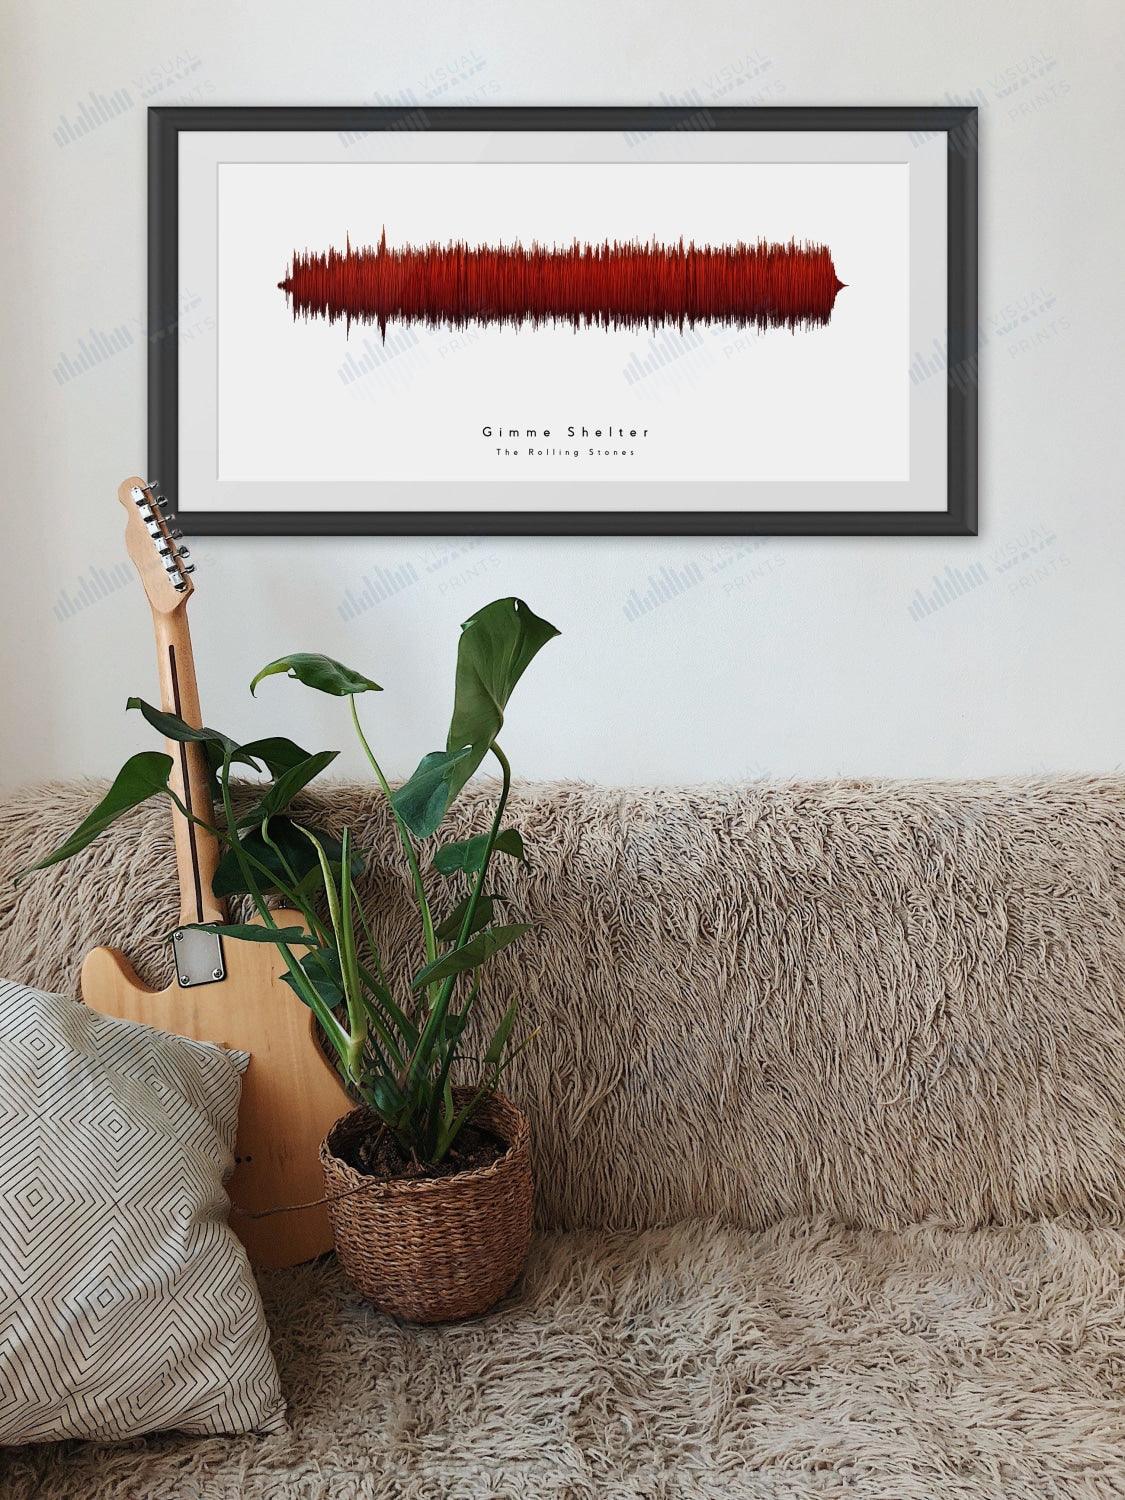 Gimme Shelter by The Rolling Stones - Visual Wave Prints